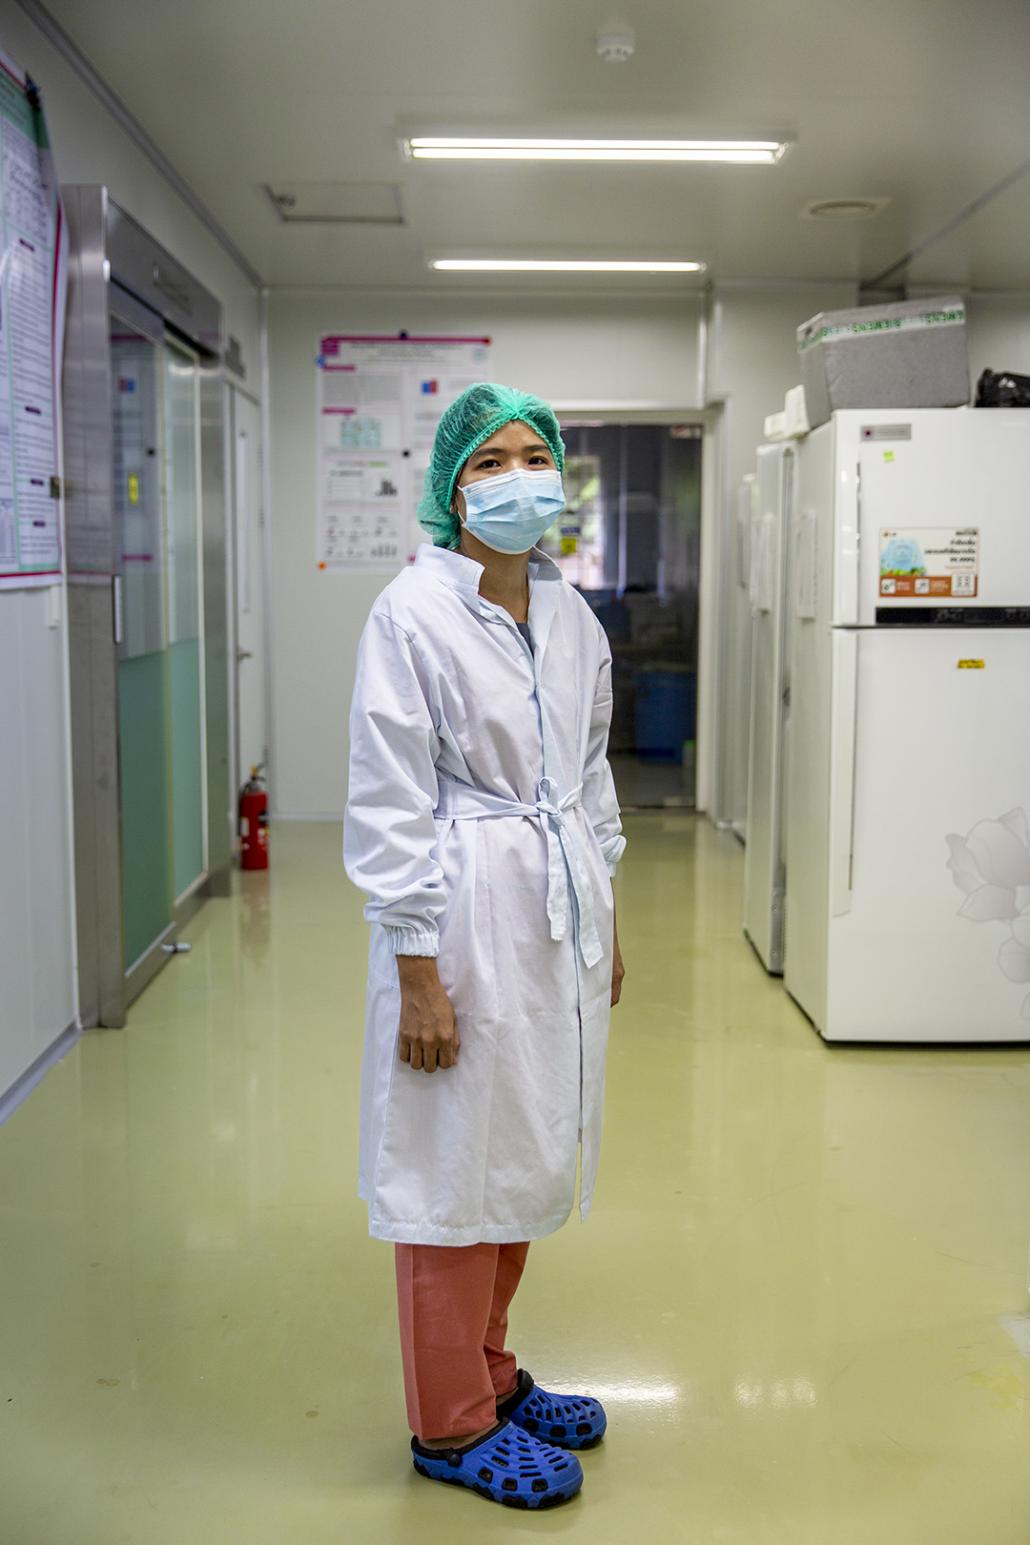 Research scientist Daw Hnin Ohnmar Swe and other laboratory staff at the Department of Medical Research have been working every day since the department began testing for COVID-19 on April 23. (Hkun Lat | Frontier)